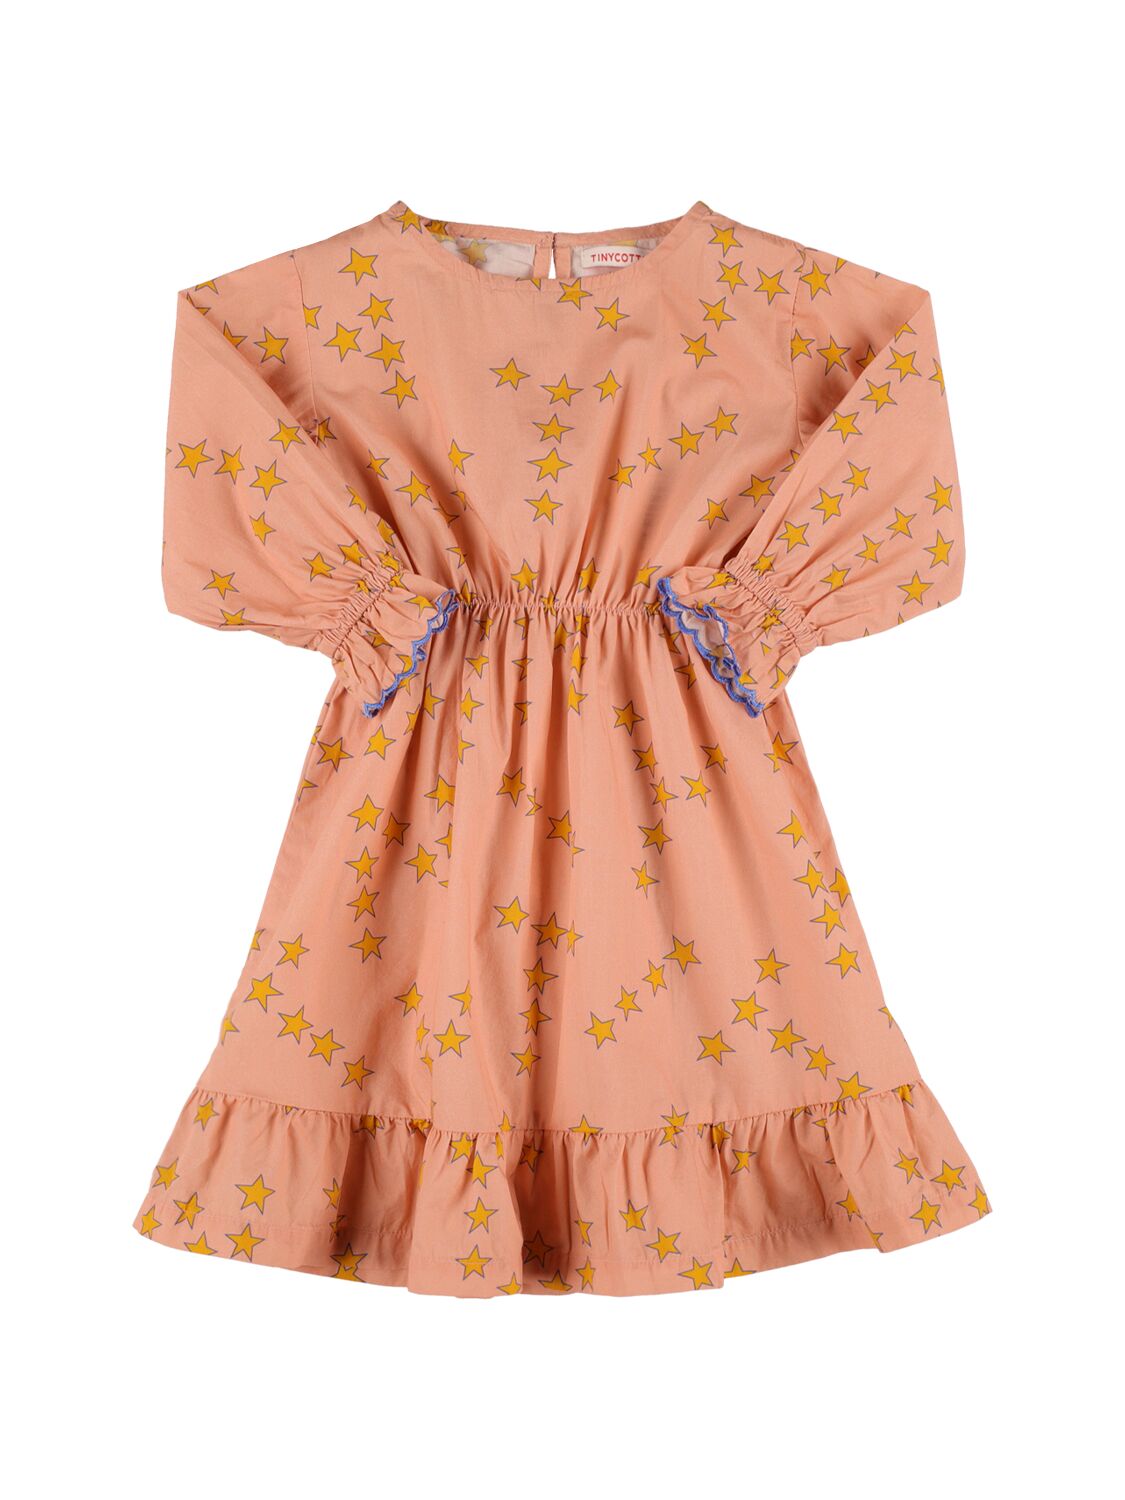 Tiny Cottons Kids' Star Print Cotton Dress In Pink